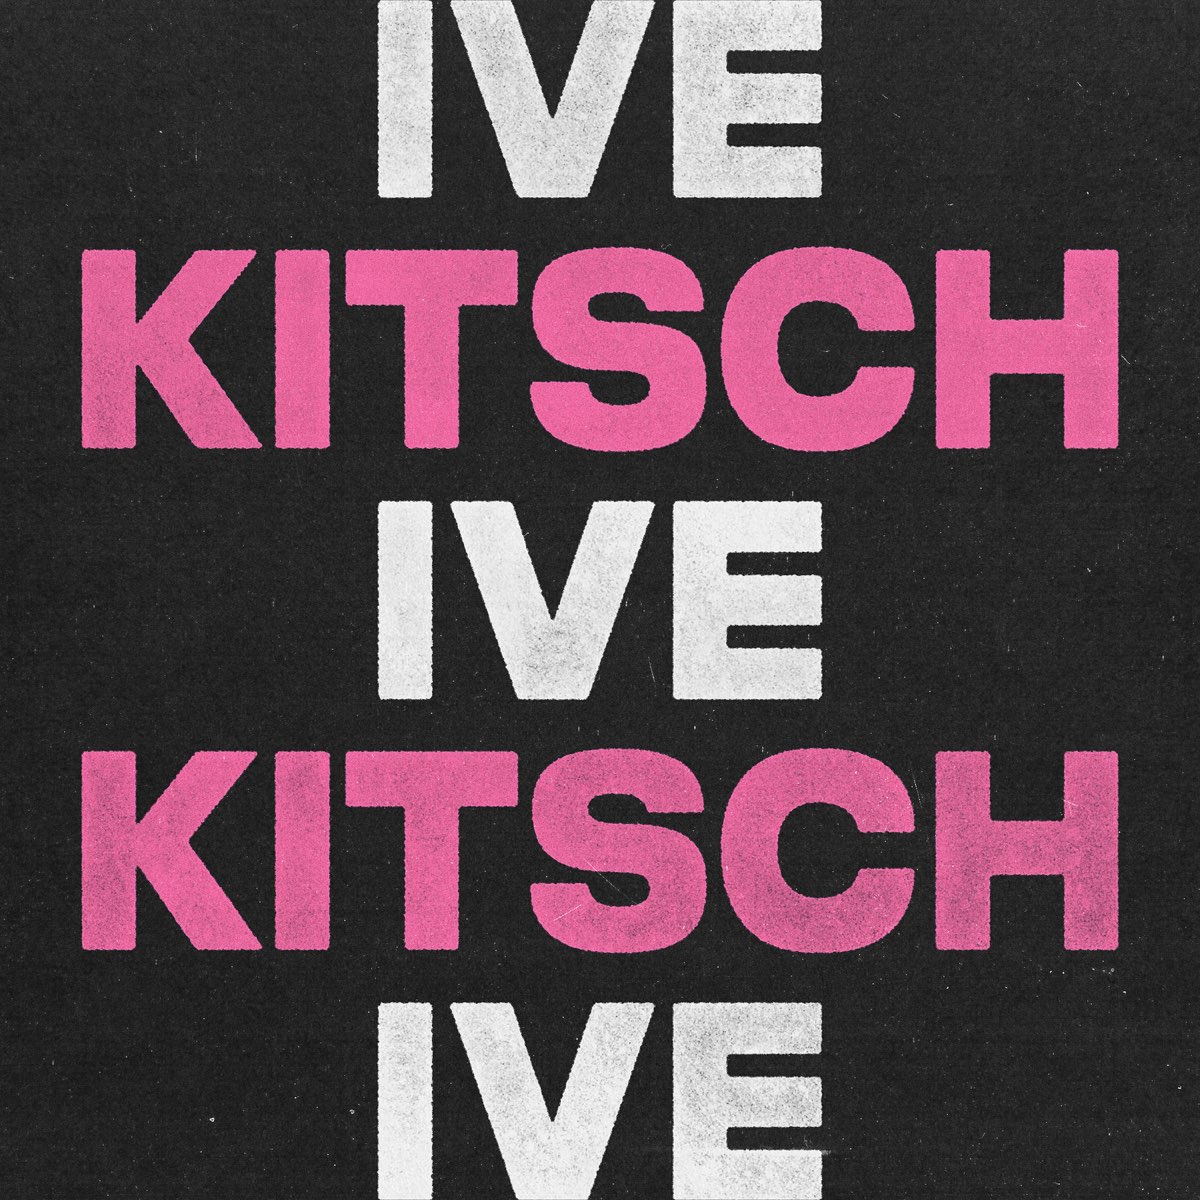 ‎Kitsch - Single by IVE on Apple Music